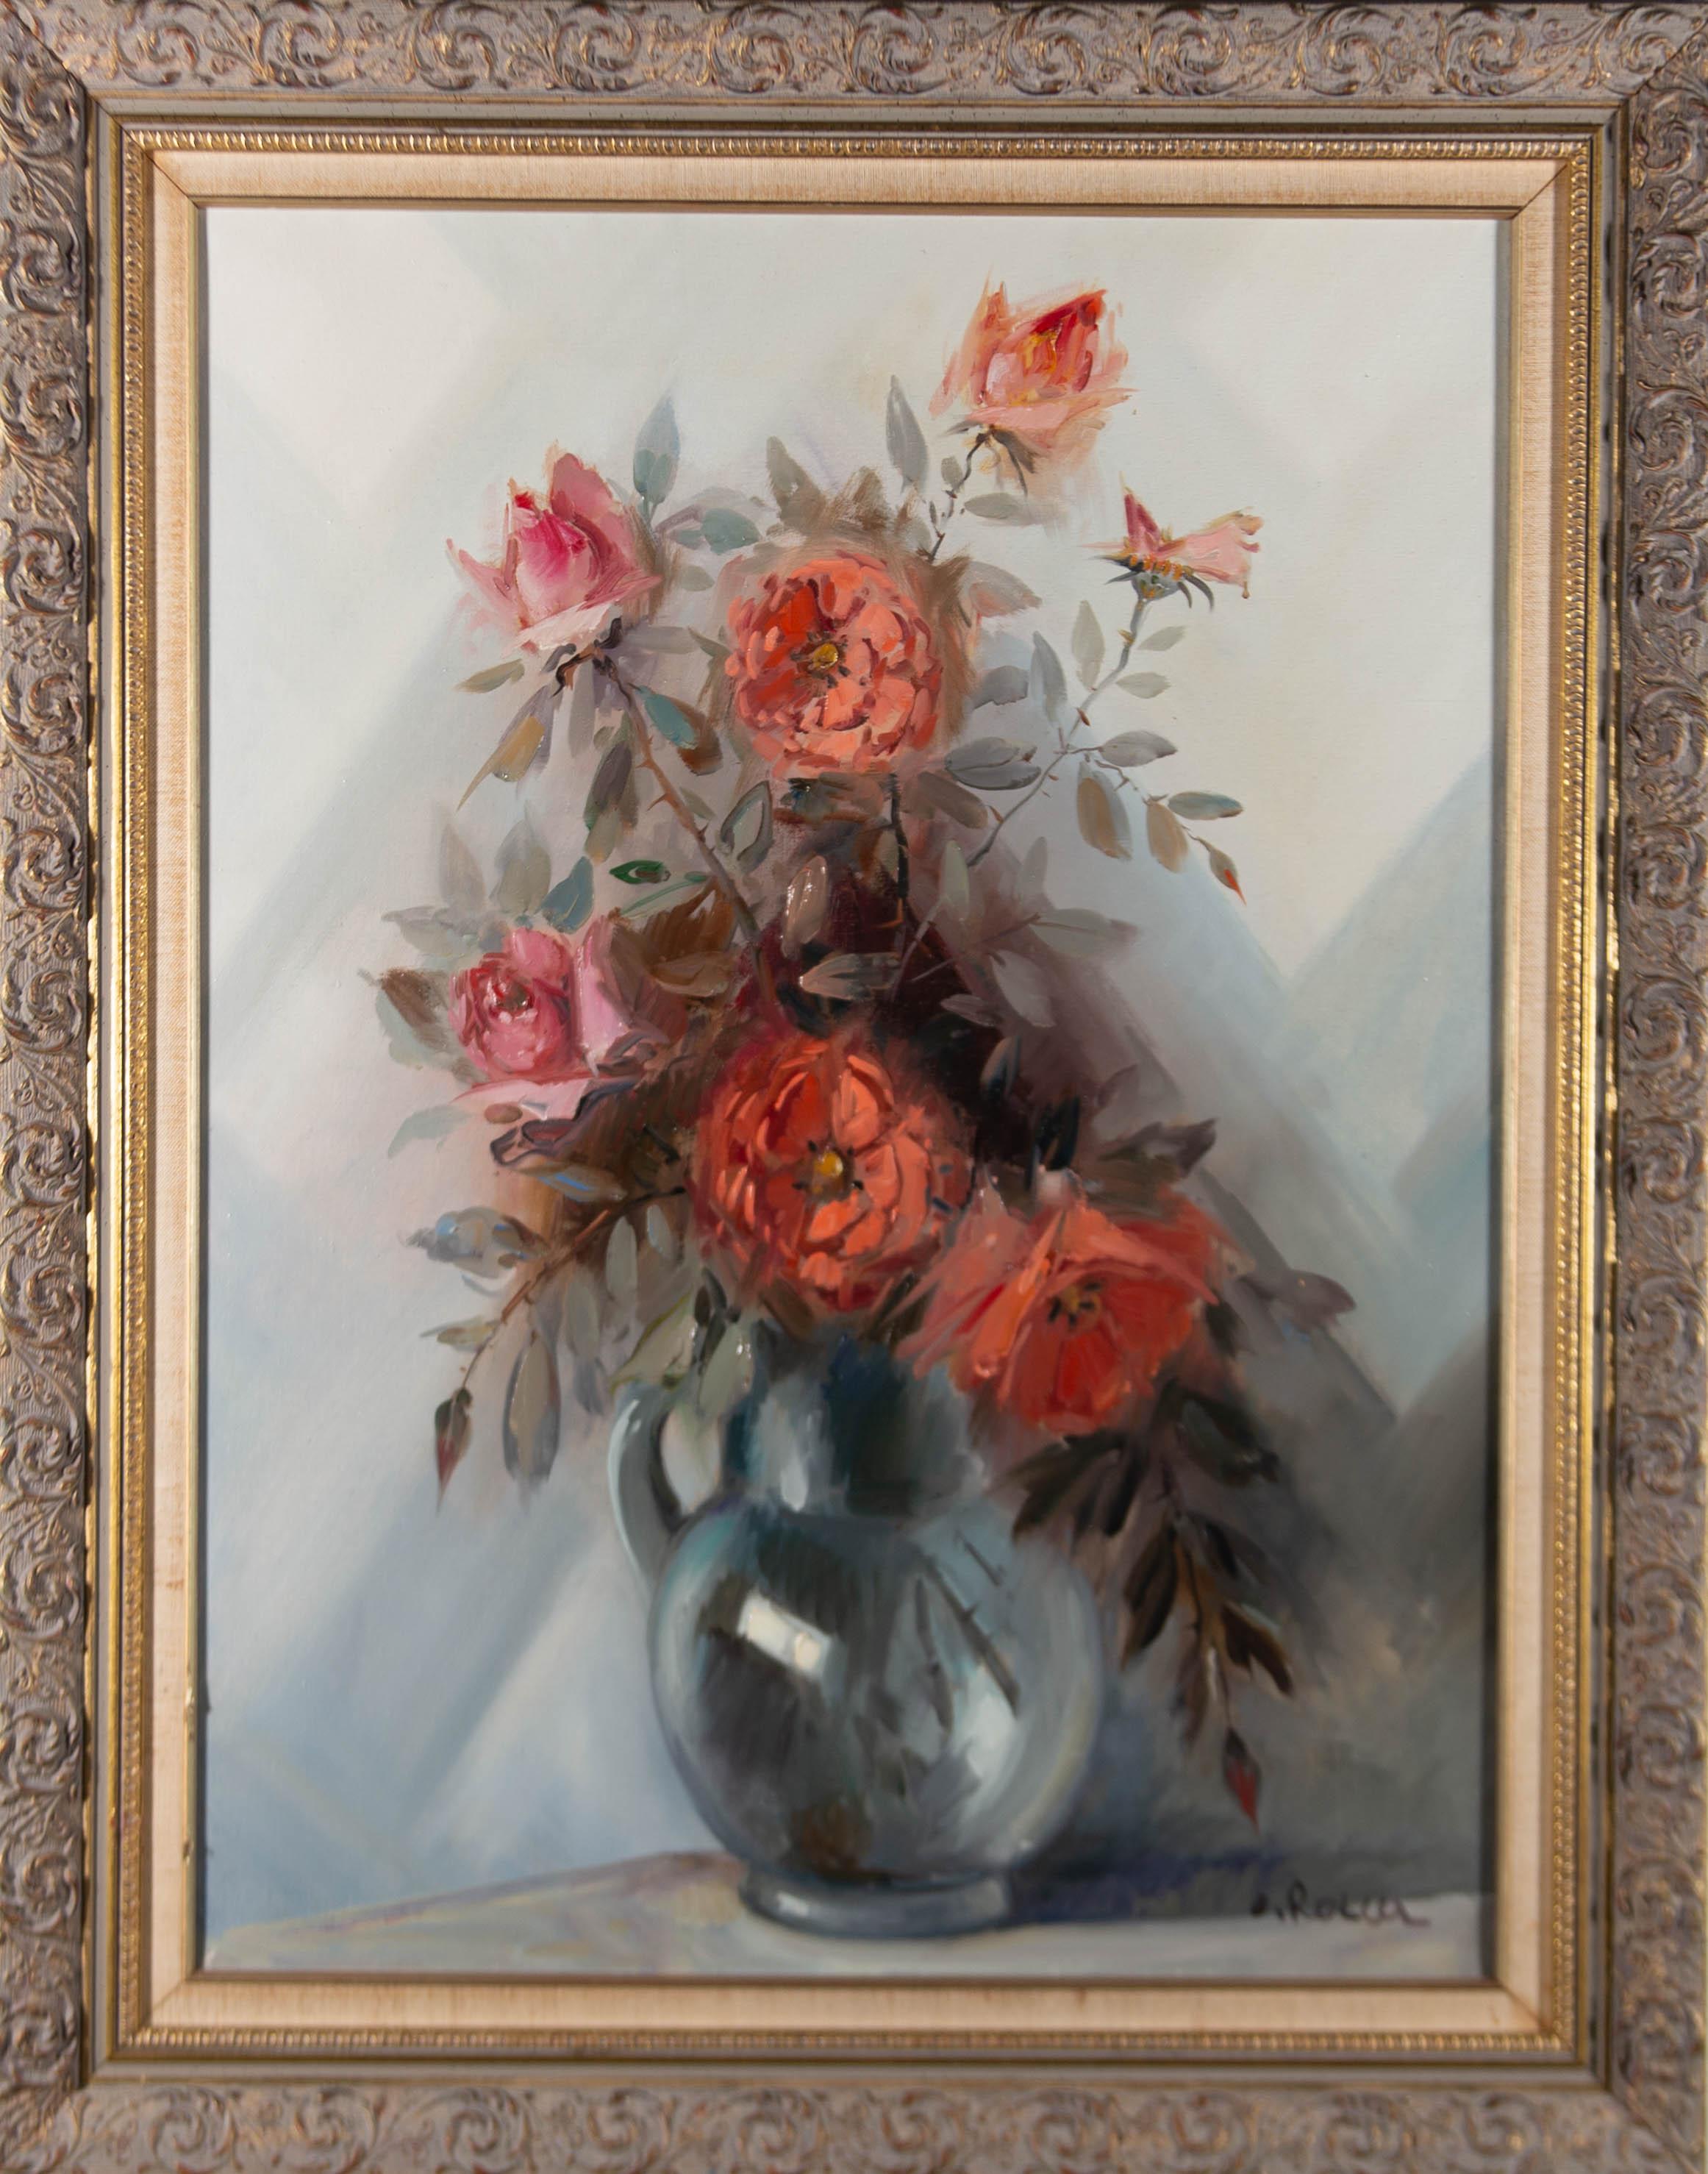 Unknown Still-Life Painting - Contemporary Oil - Coral Roses